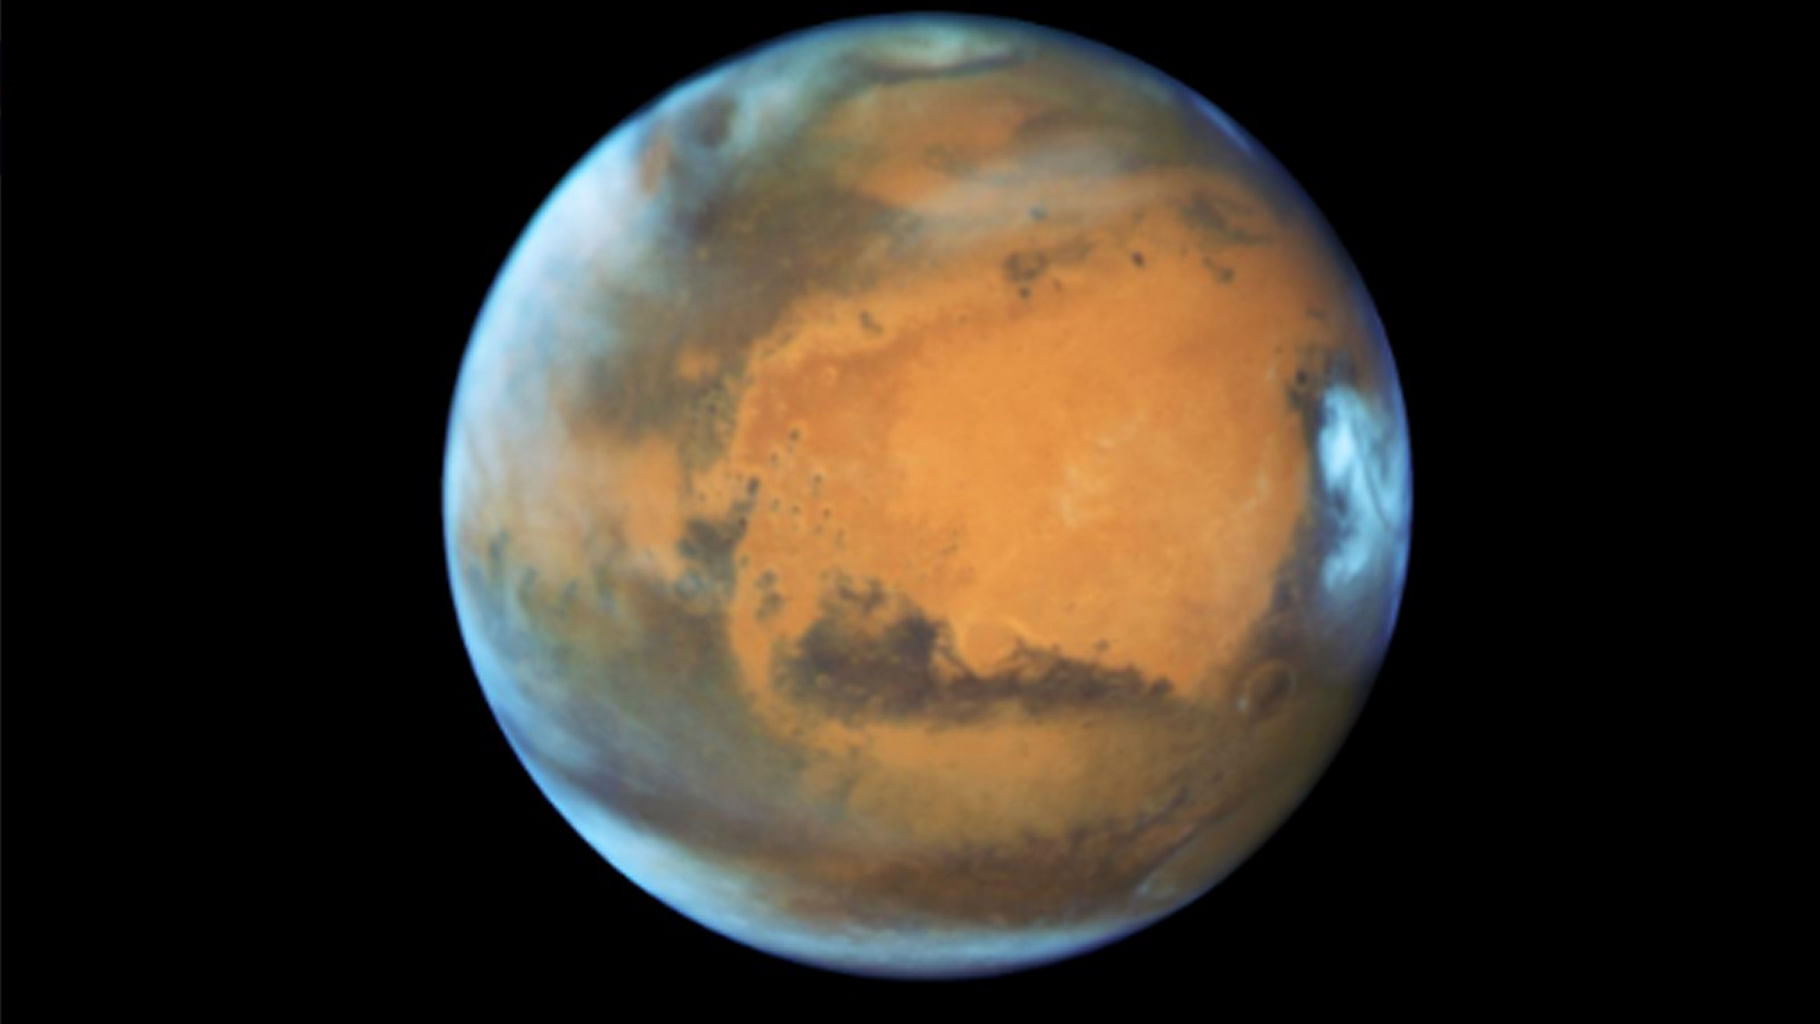 

Mars makes its closest approach to Earth in a decade this month, providing sky-watchers with a celestial show from dusk to dawn. (Photo Courtesy: Twitter/<a href="https://twitter.com/NASA">@NASA</a>)